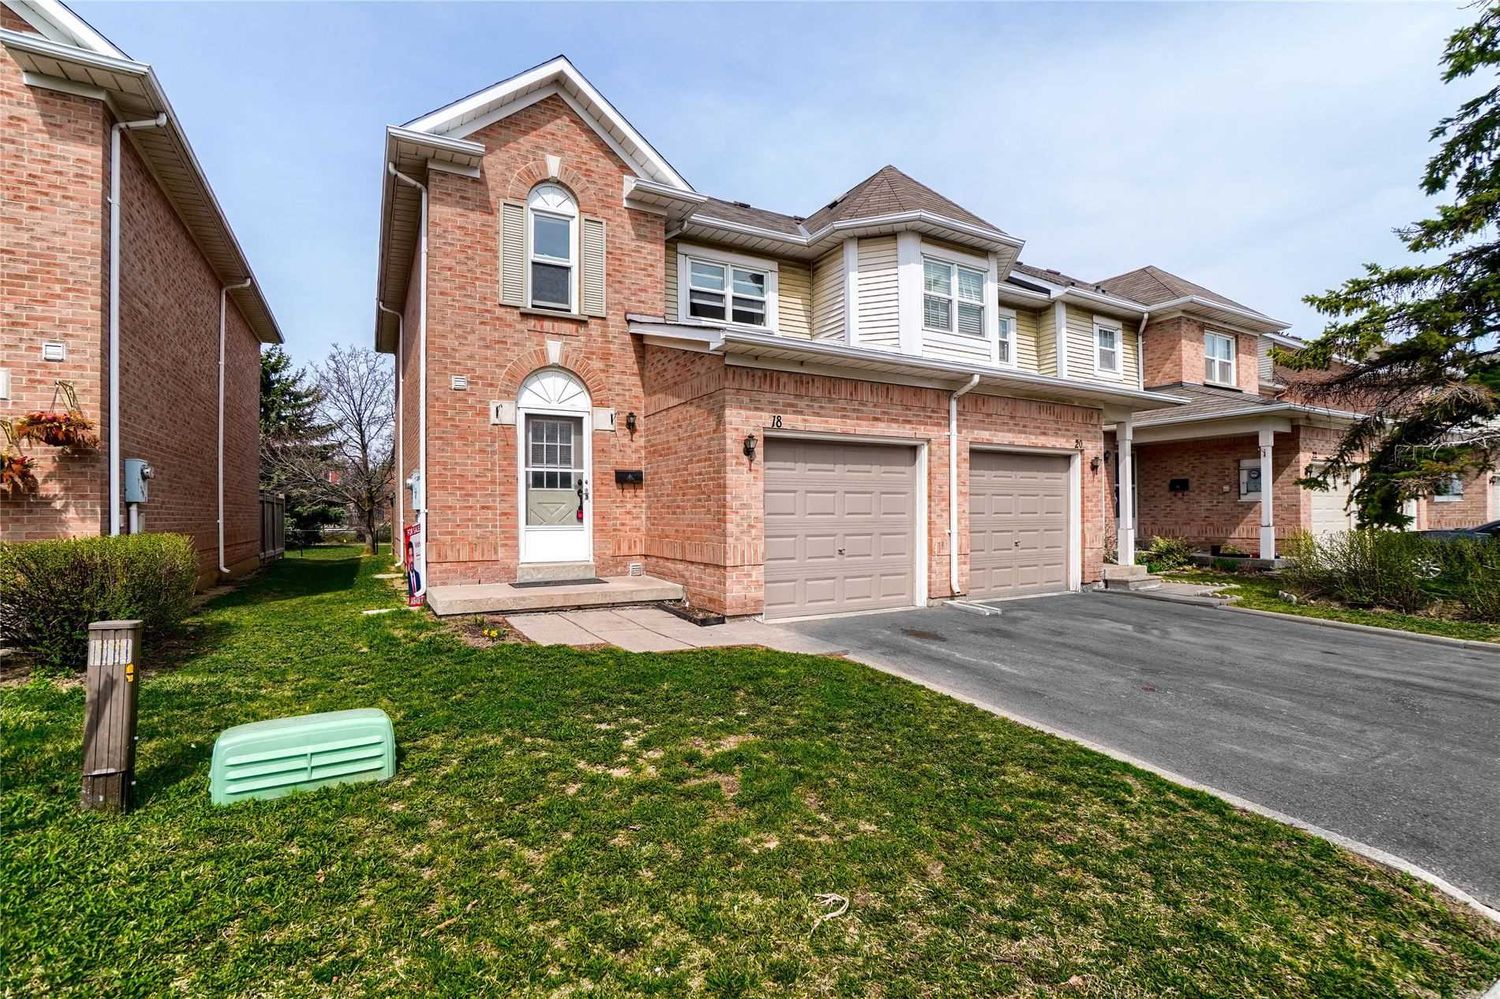 2-87 Wickstead Court. Wickstead Court Townhomes is located in  Brampton, Toronto - image #2 of 2